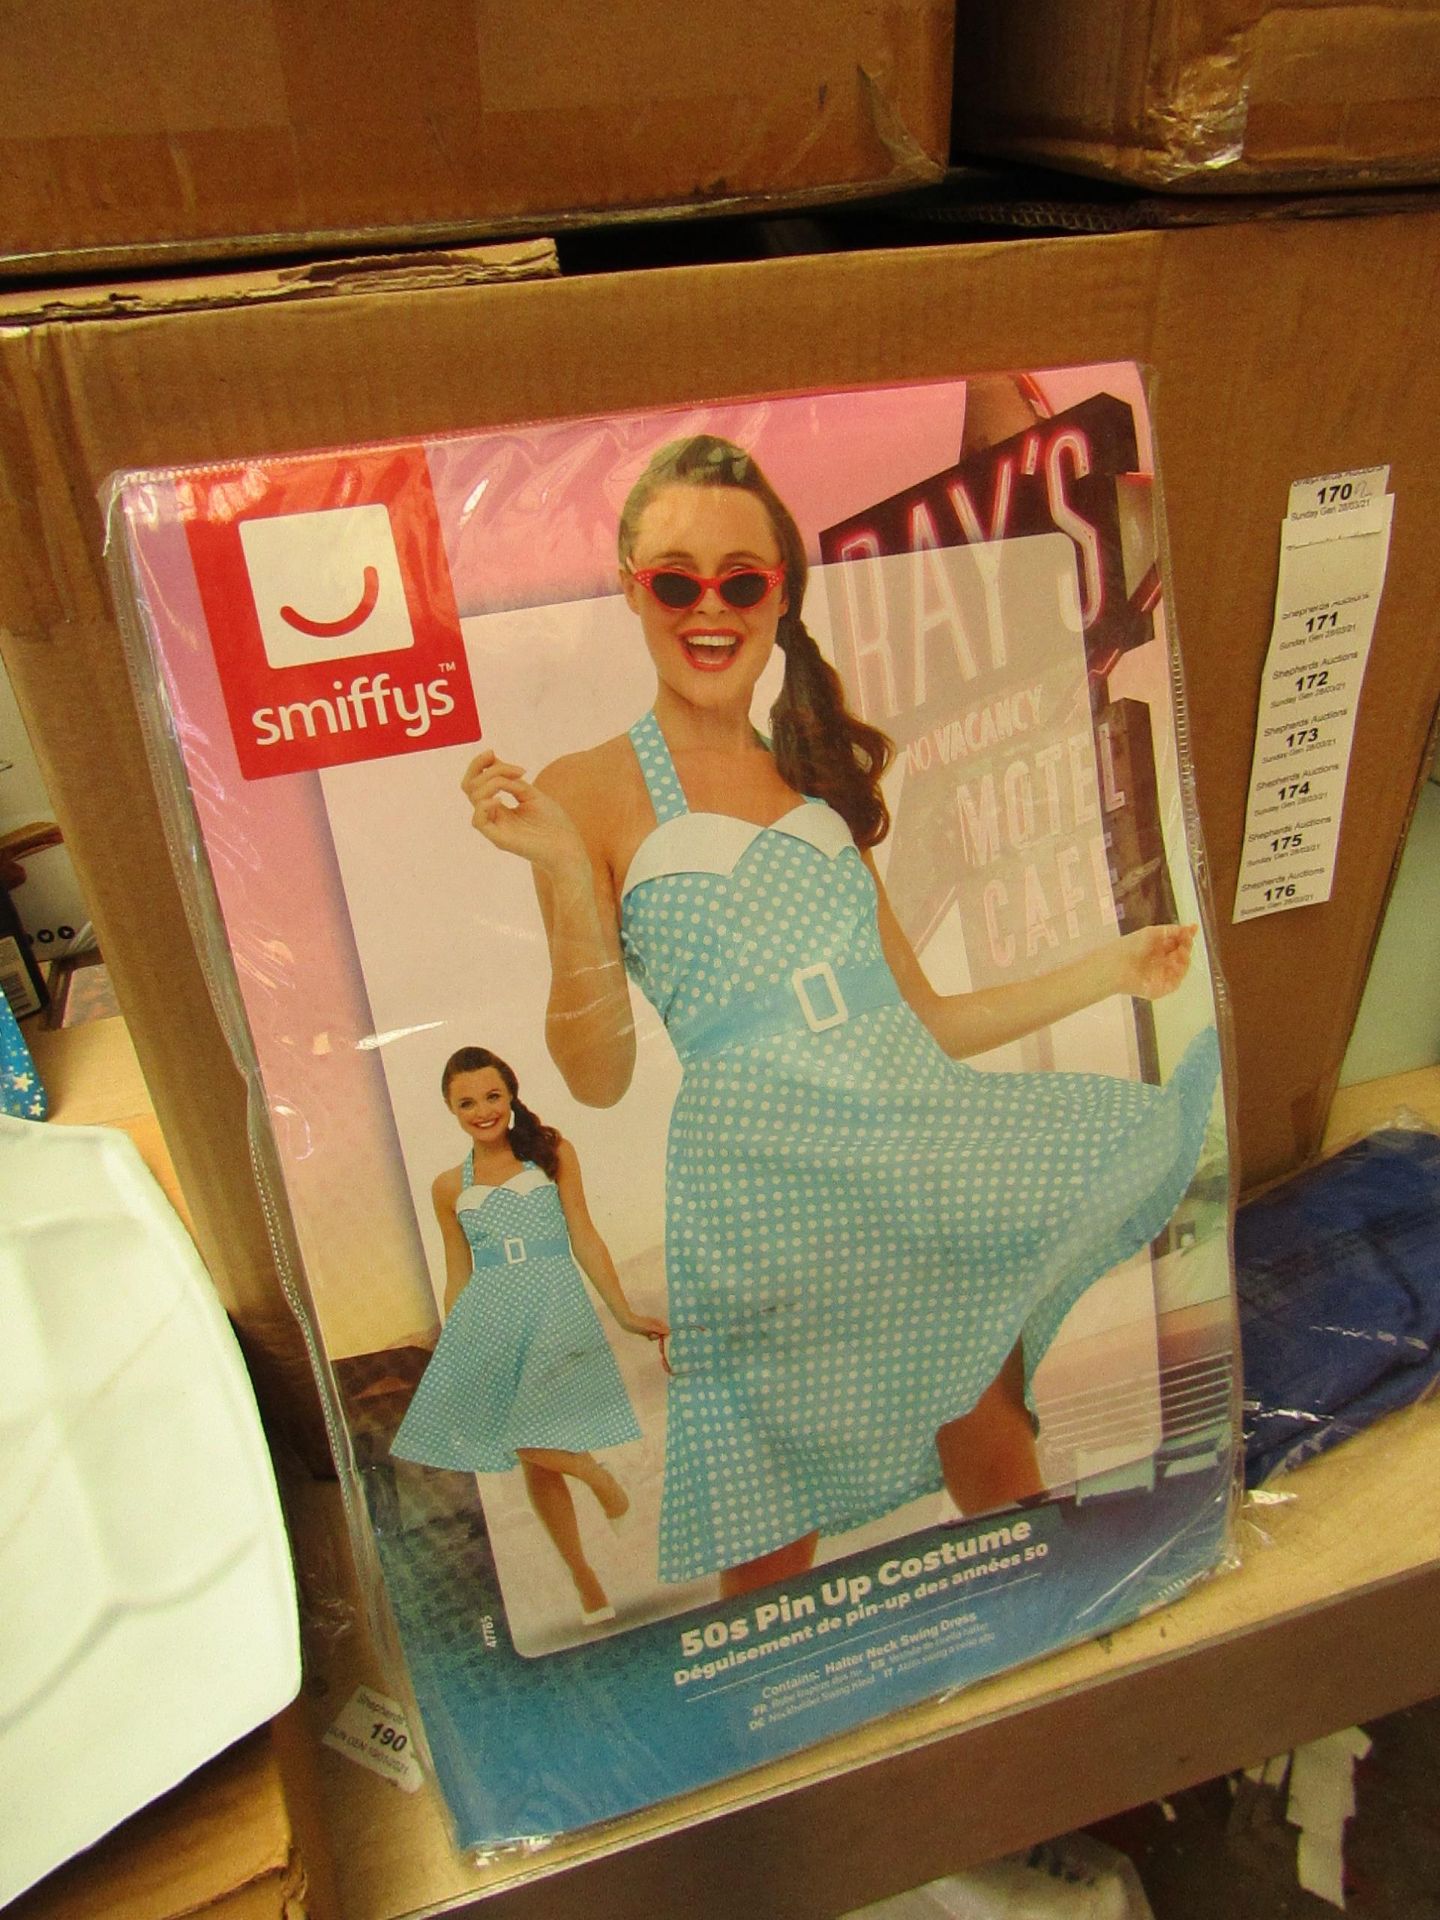 4x Smiffys - 50s Pin Up Costume - New & Packaged.